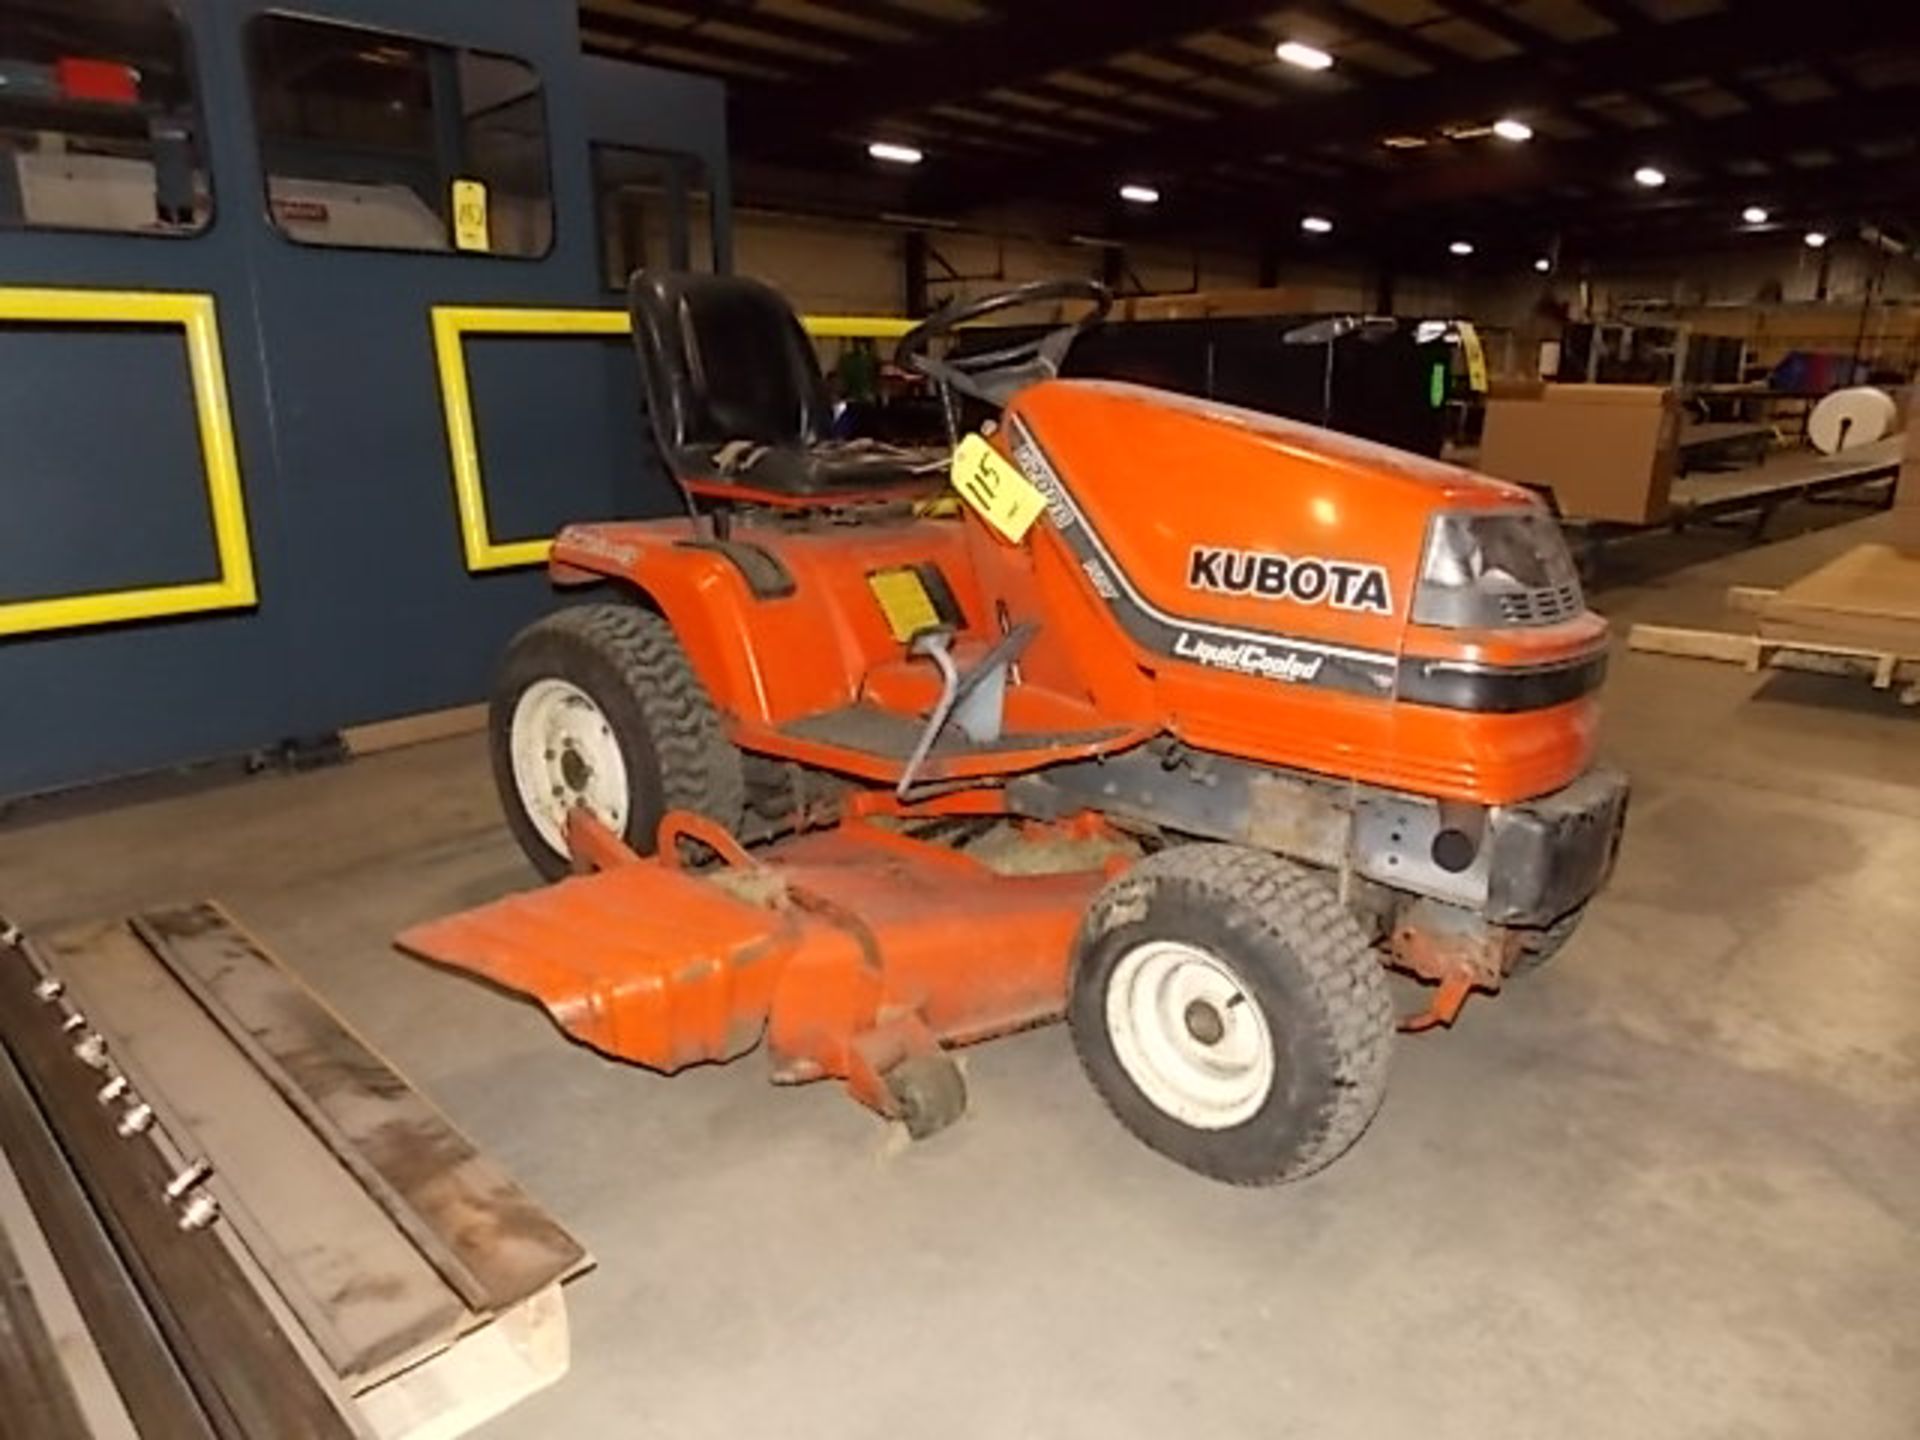 Kubota 4-Wheel Steering Liquid Cooled Lawn Tractor Model G2000 HST, with 48 in. Mower Deck